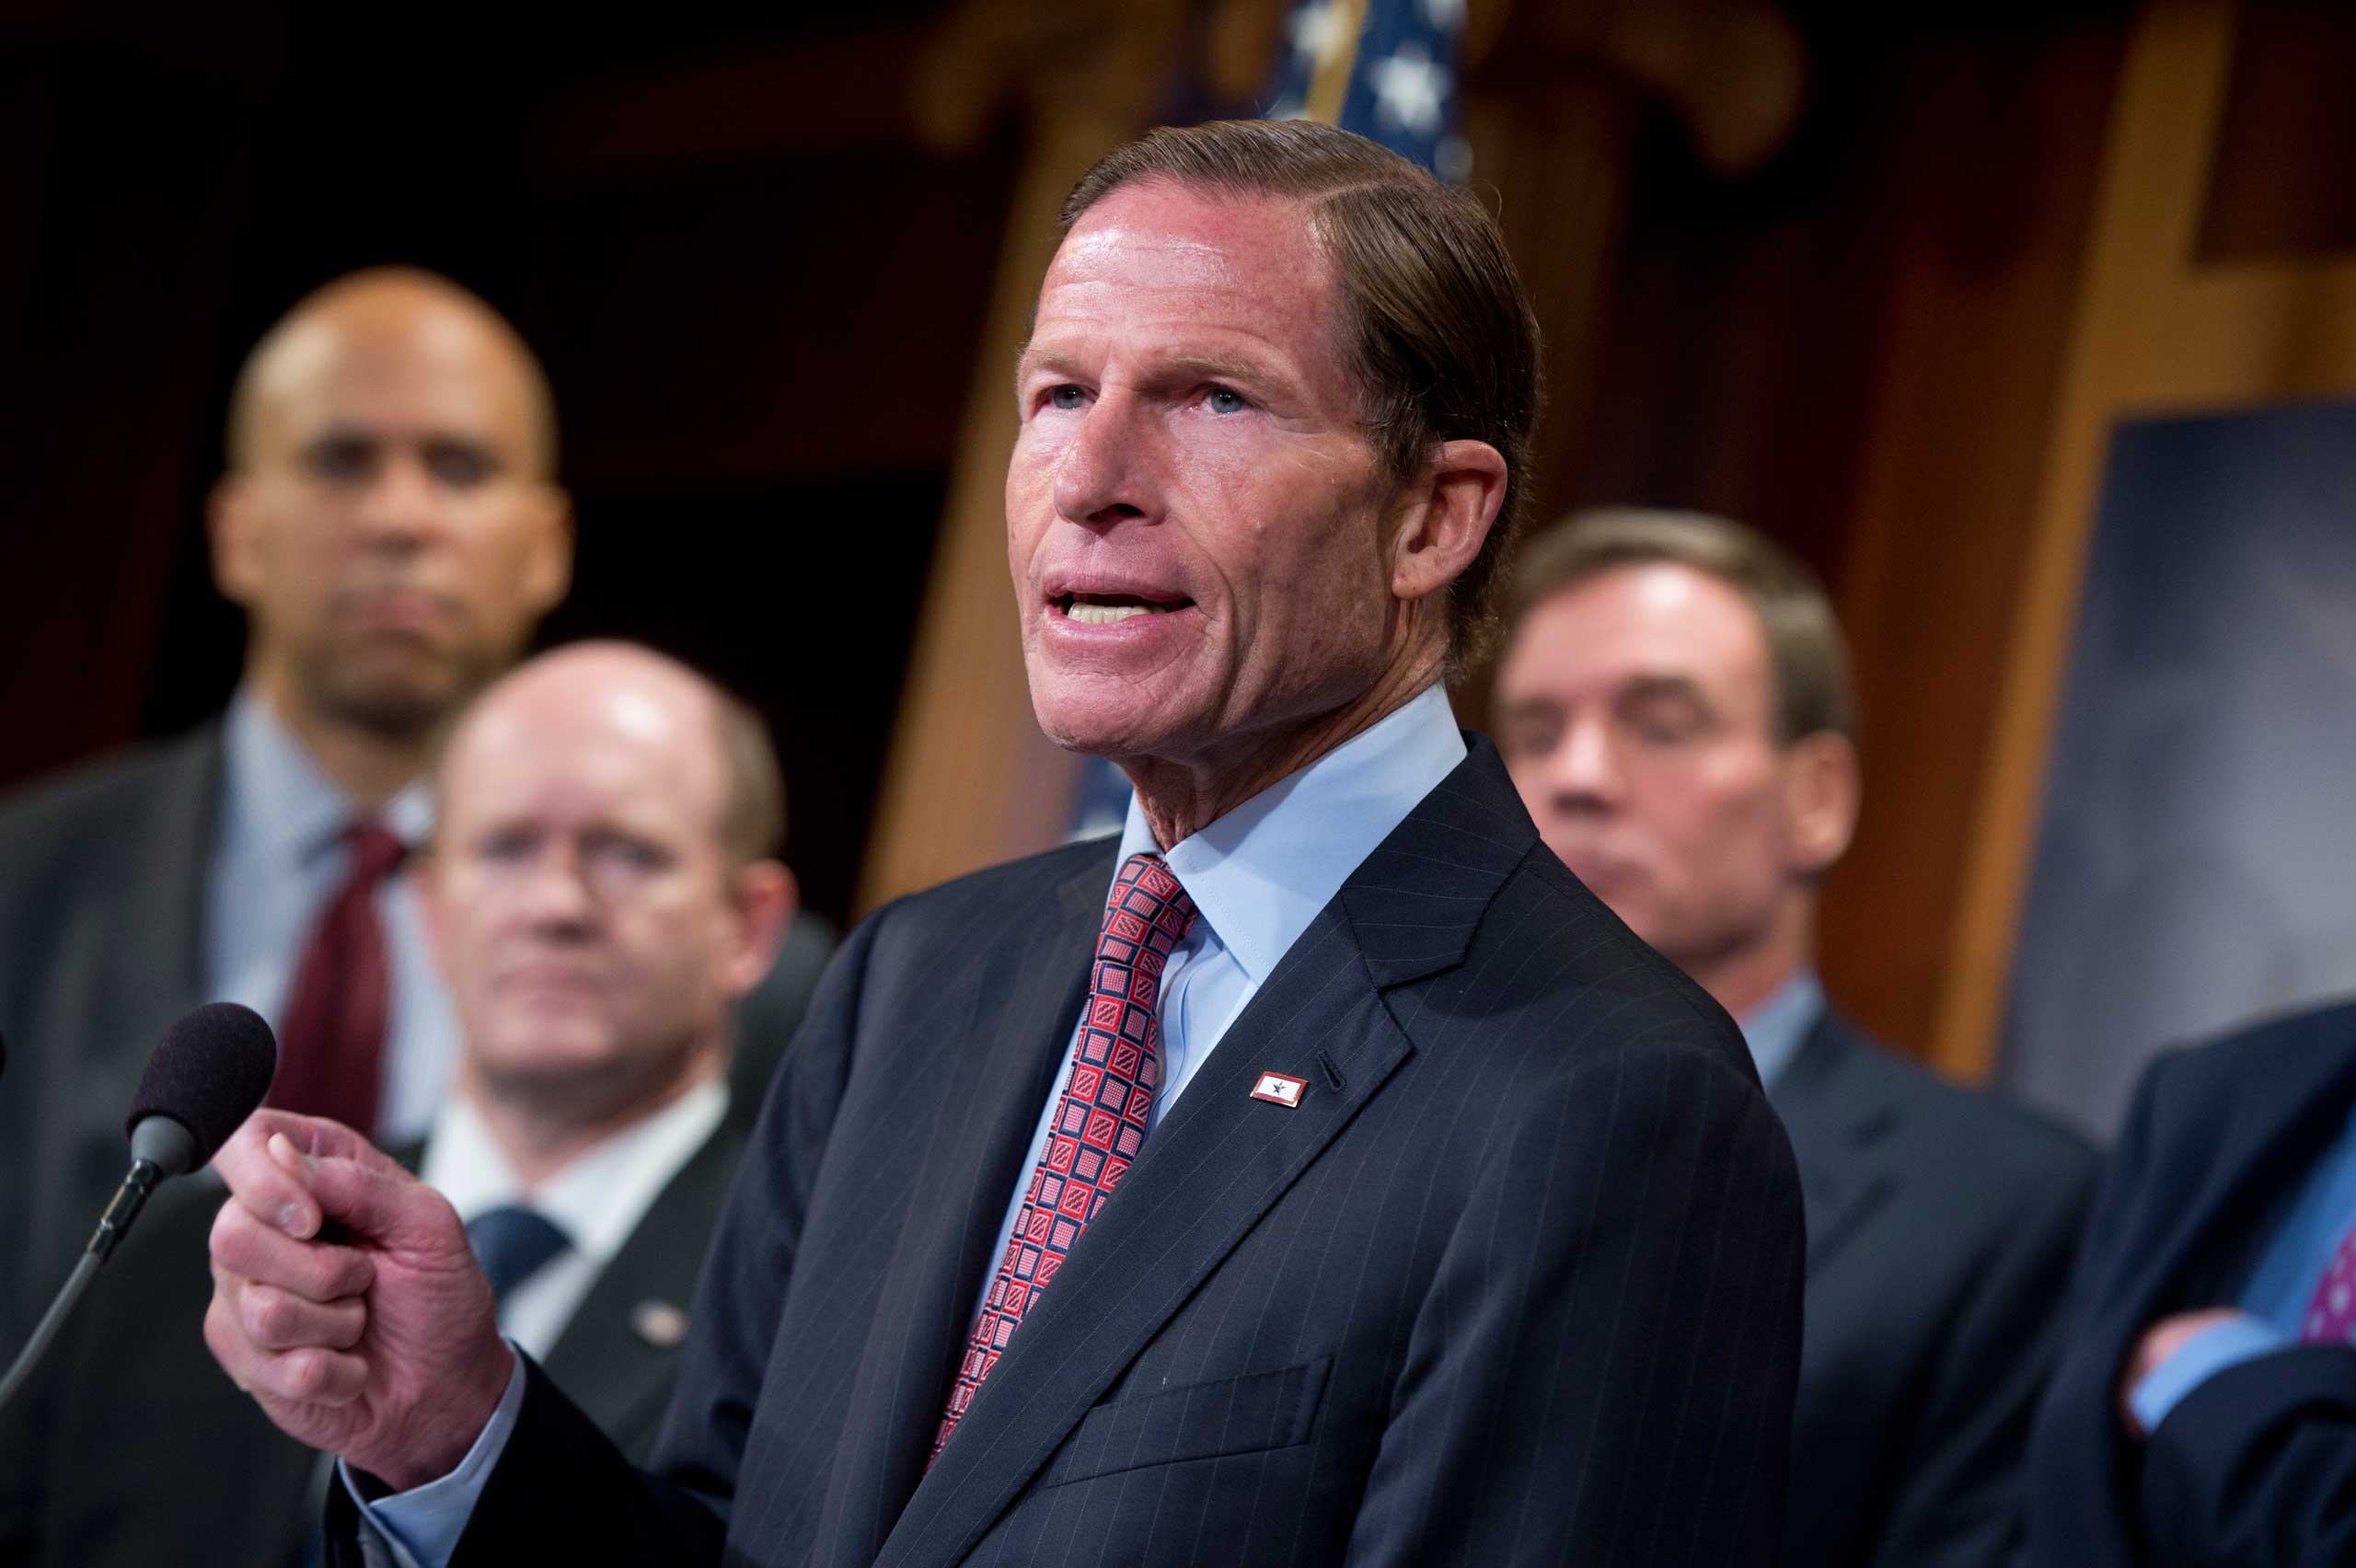 Sen. Richard Blumenthal, D-Conn., speaks during a news conference in the Capitol's Senate studio to introduce the Iran Policy Oversight Act of 2015, Oct. 1, 2015. (Tom Williams—Getty Images)